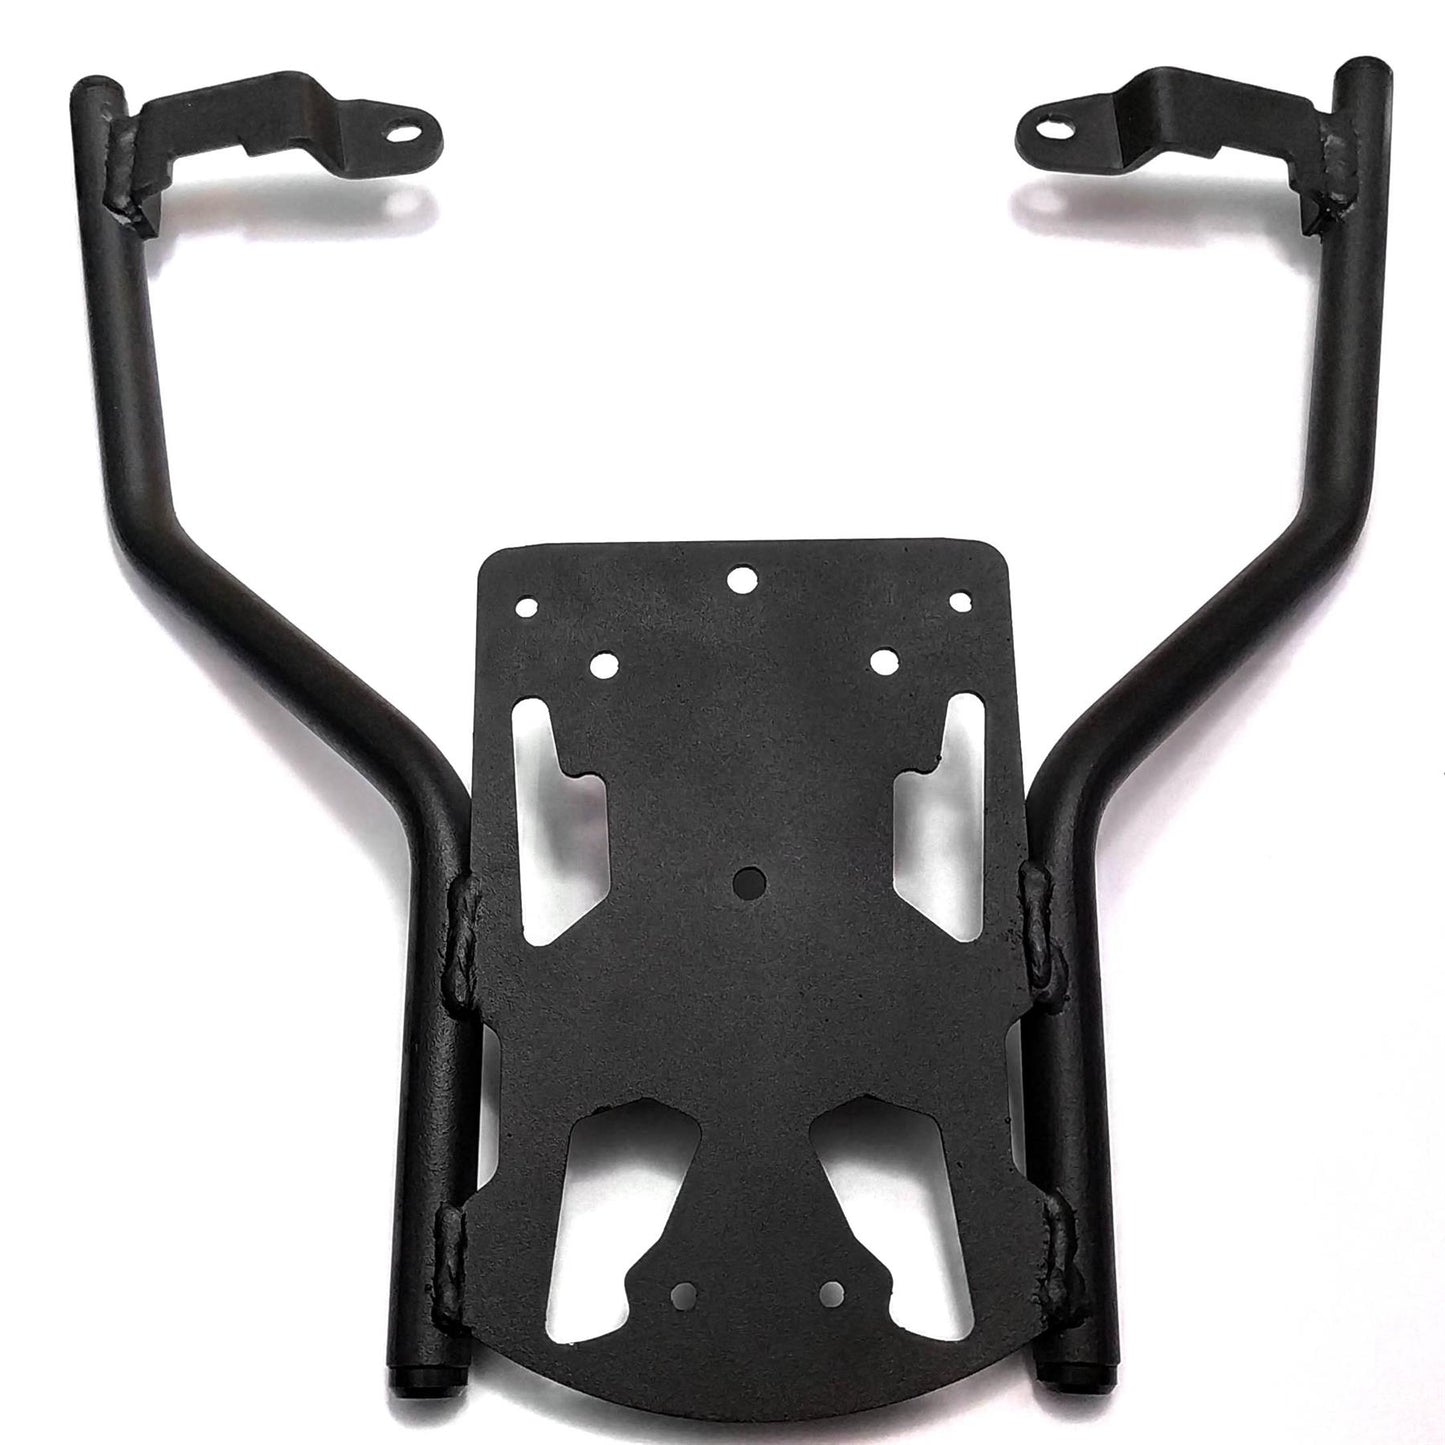 NMAX125 rear luggage rack 15-20 FITS ONLY BETWEEN 2015-20